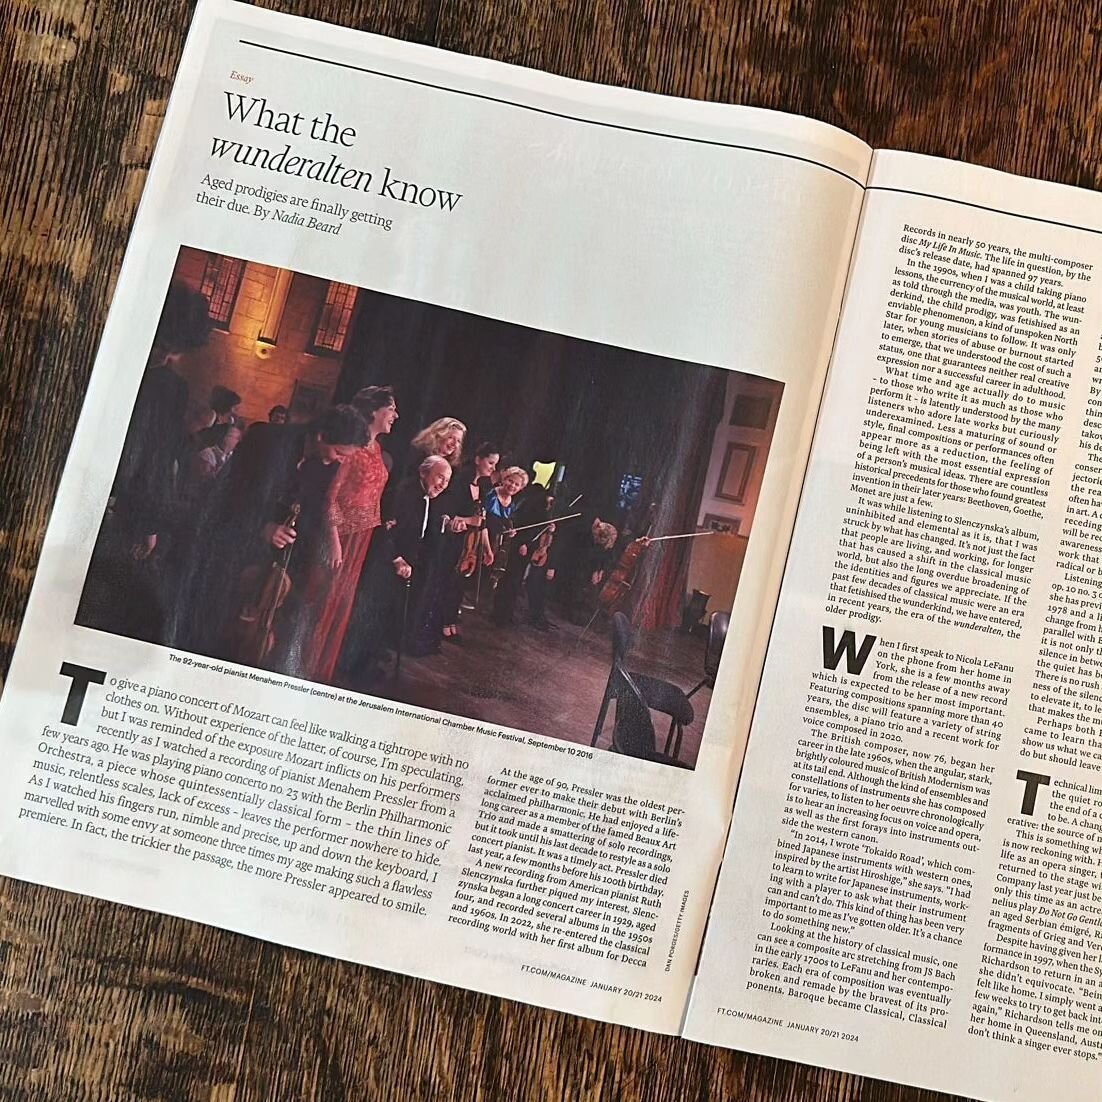 An essay in @ft_weekend on the &quot;wunderalten&quot; -- the older prodigy -- and the relationship between age and creativity.

I listened to a lot of music while writing this essay, going backwards and forwards in one or other composer's oeuvre to 